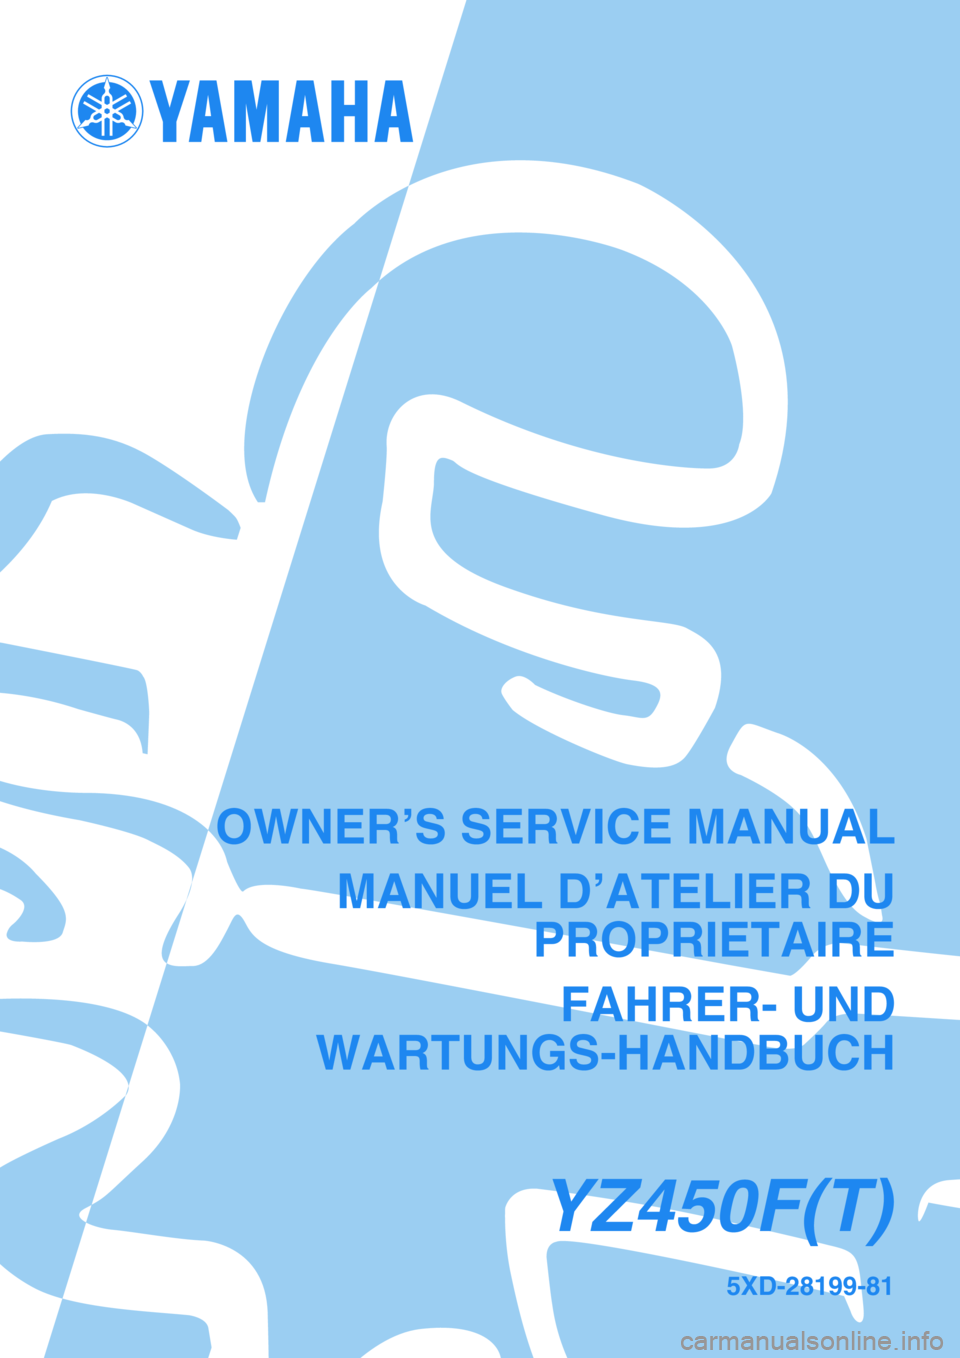 YAMAHA YZ450F 2005  Owners Manual 5XD-28199-81
YZ450F(T)
OWNER’S SERVICE MANUAL
MANUEL D’ATELIER DU
PROPRIETAIRE
FAHRER- UND
WARTUNGS-HANDBUCH 